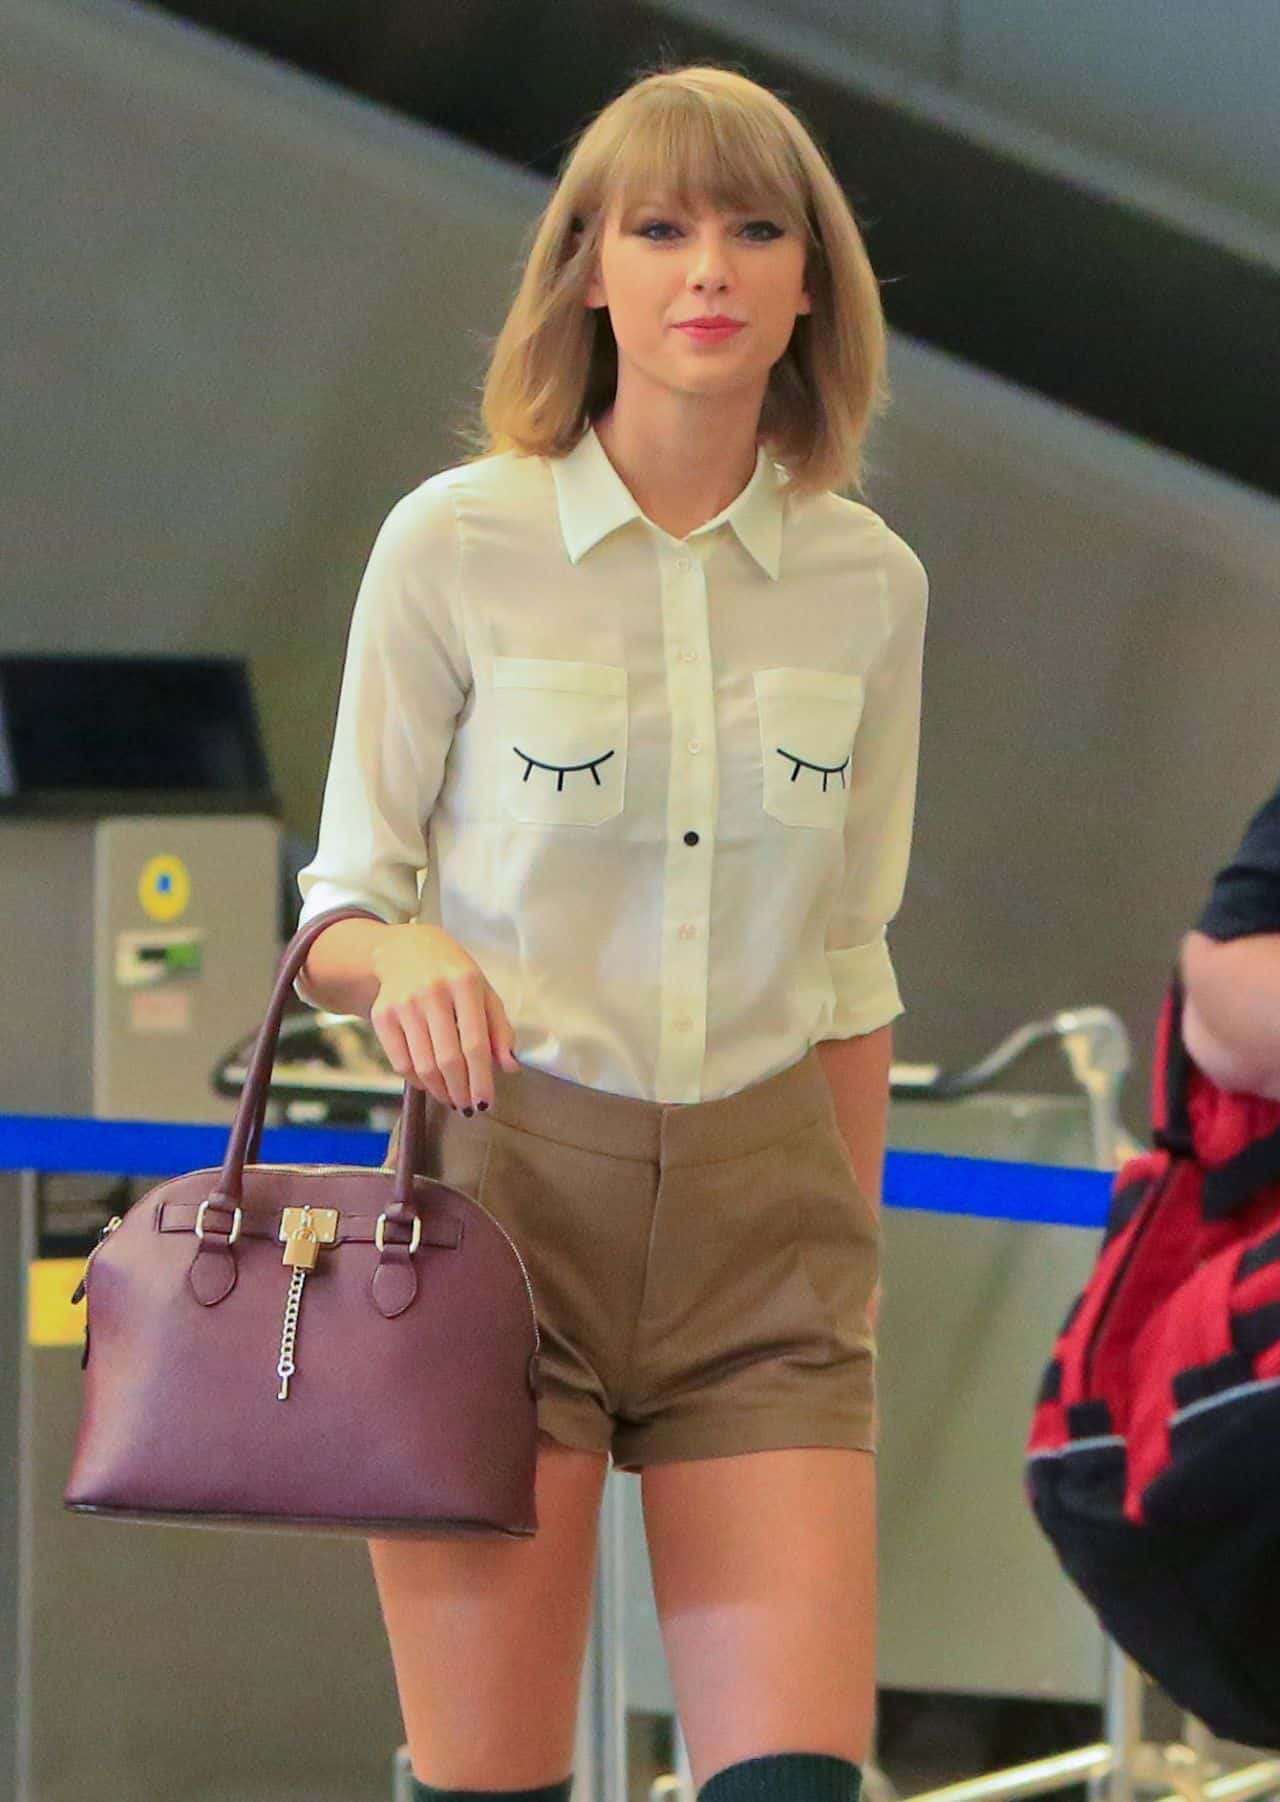 Taylor Swift Wears Brown Shorts and a White Shirt at LAX Airport